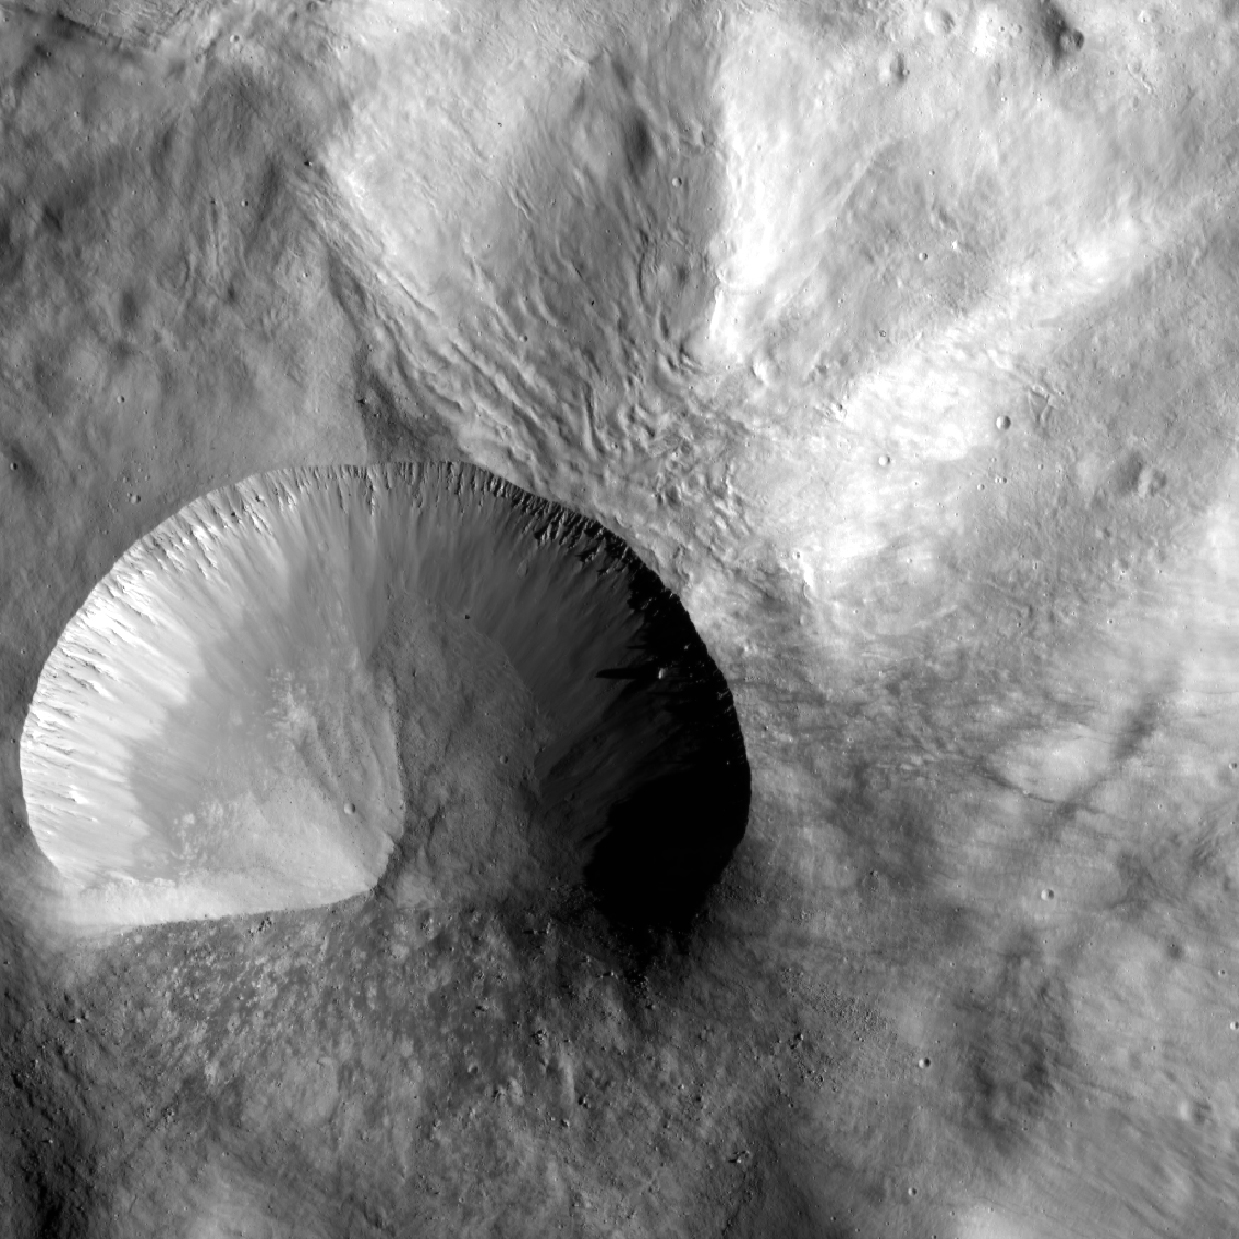 Layered young crater as imaged by NASA's Dawn spacecraft